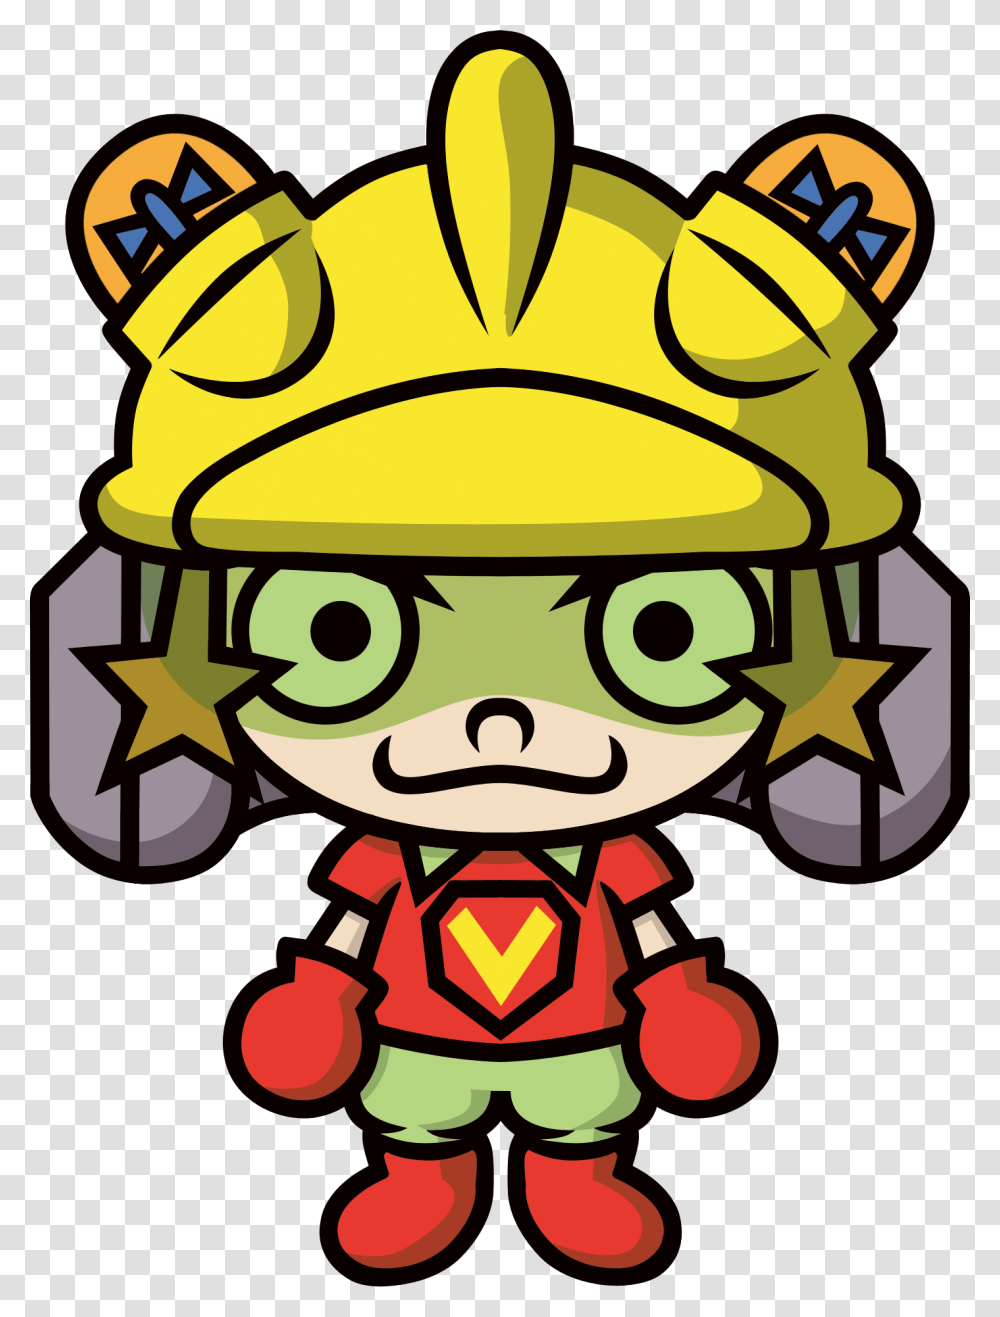 Would You Like More Nintendo Games With Game Amp Warioquots 9 Volt Warioware Gold, Elf, Lawn Mower, Tool, Toy Transparent Png